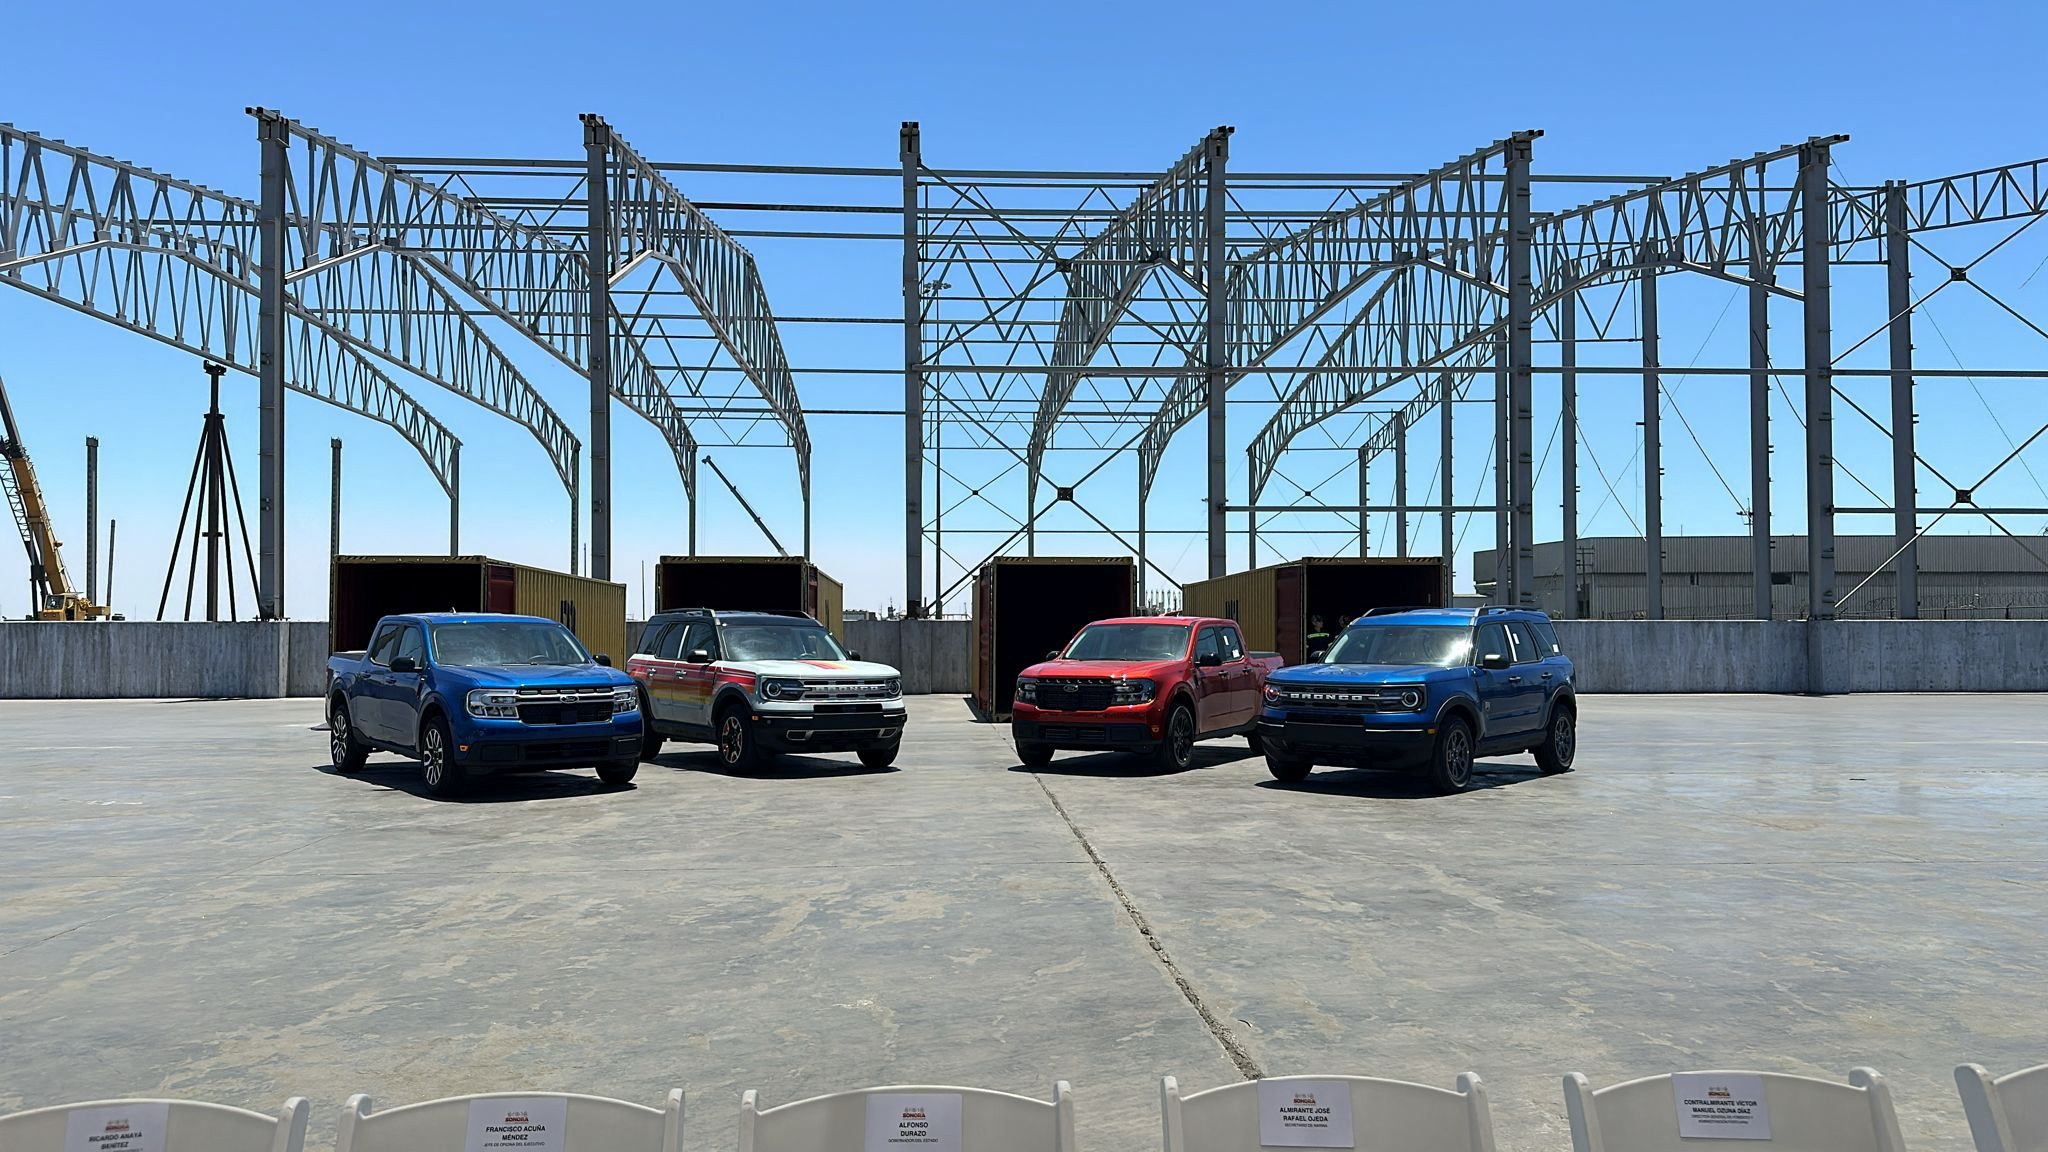 Ford vehicles are shown at the Guaymas port in Sonora, Mexico